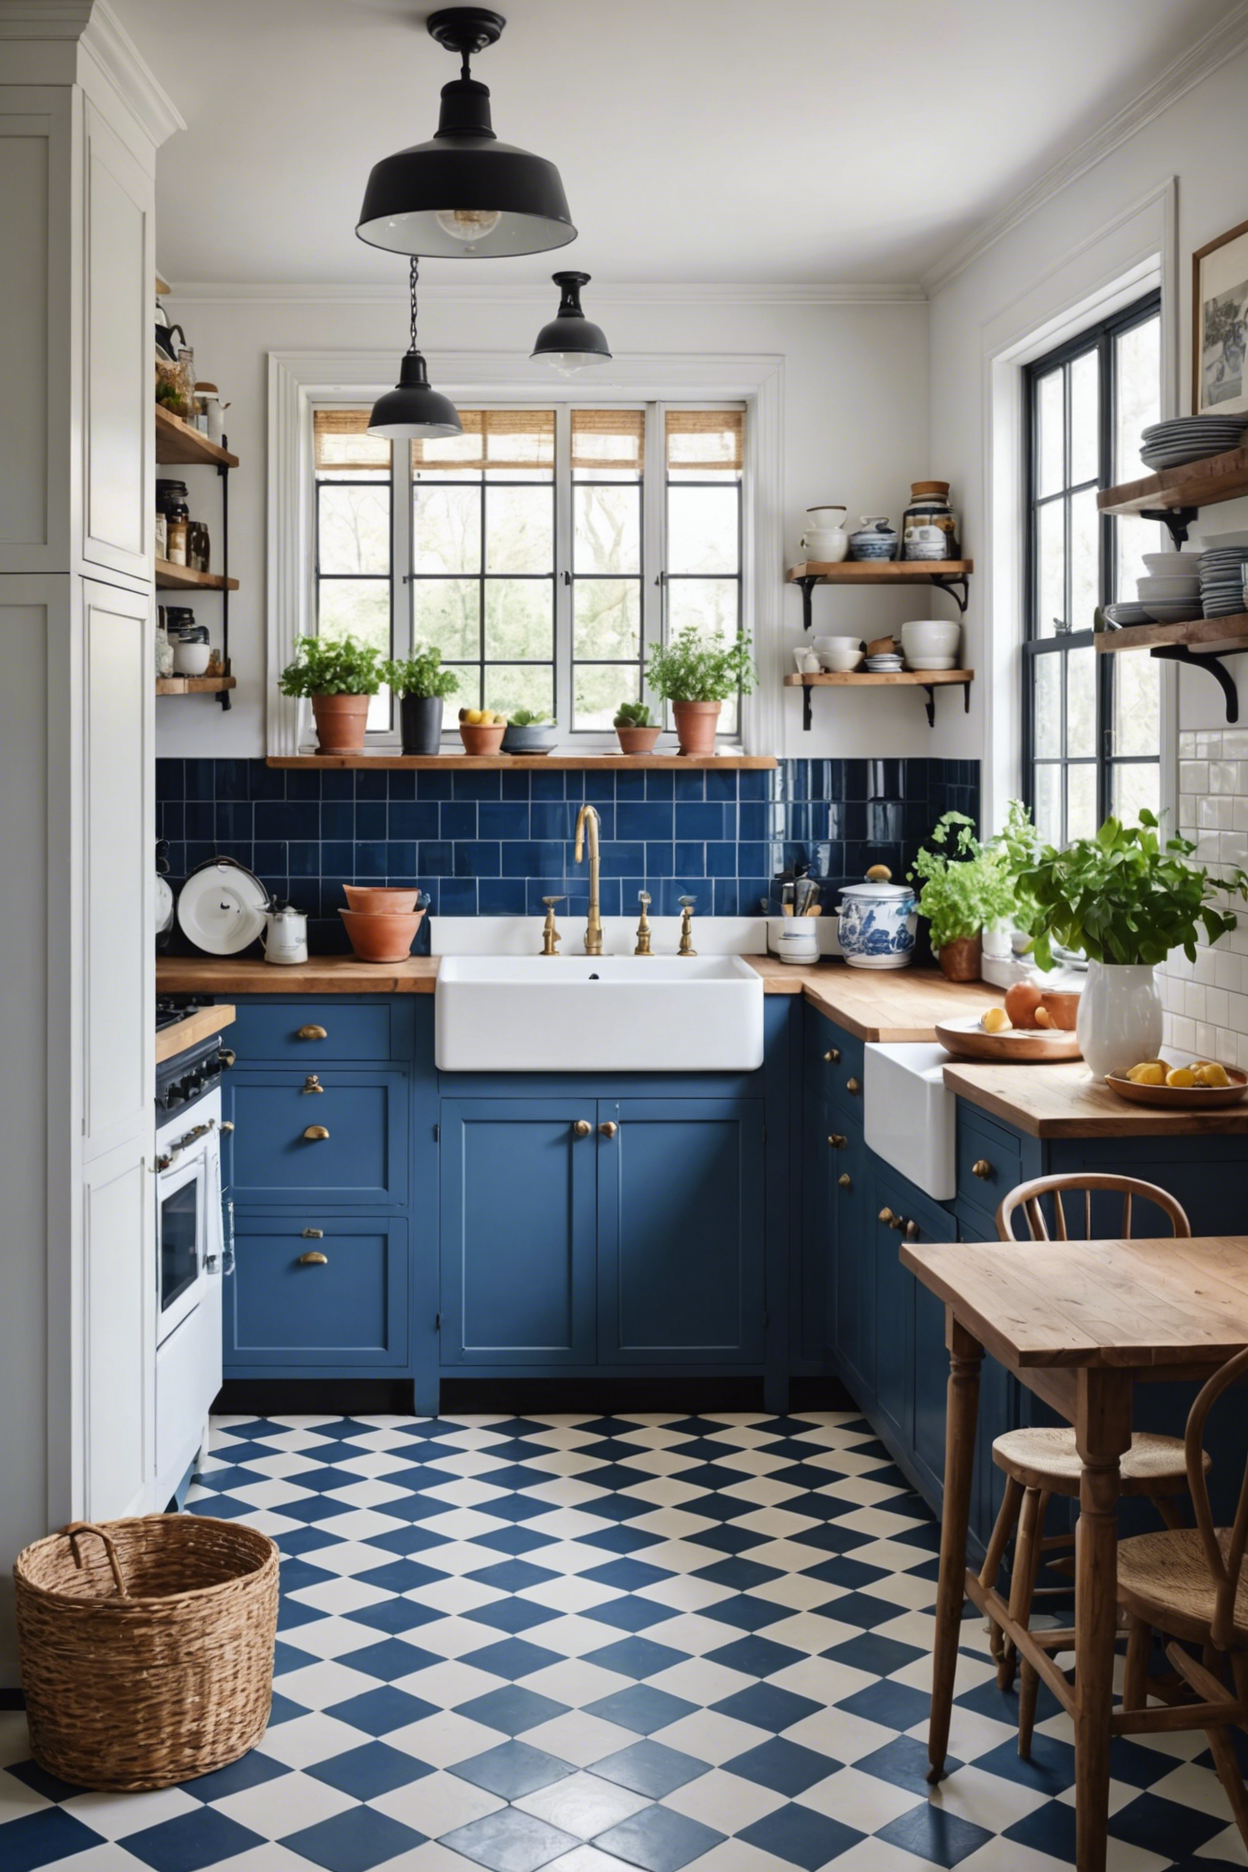 Modern vintage kitchen with blue and white aesthetic